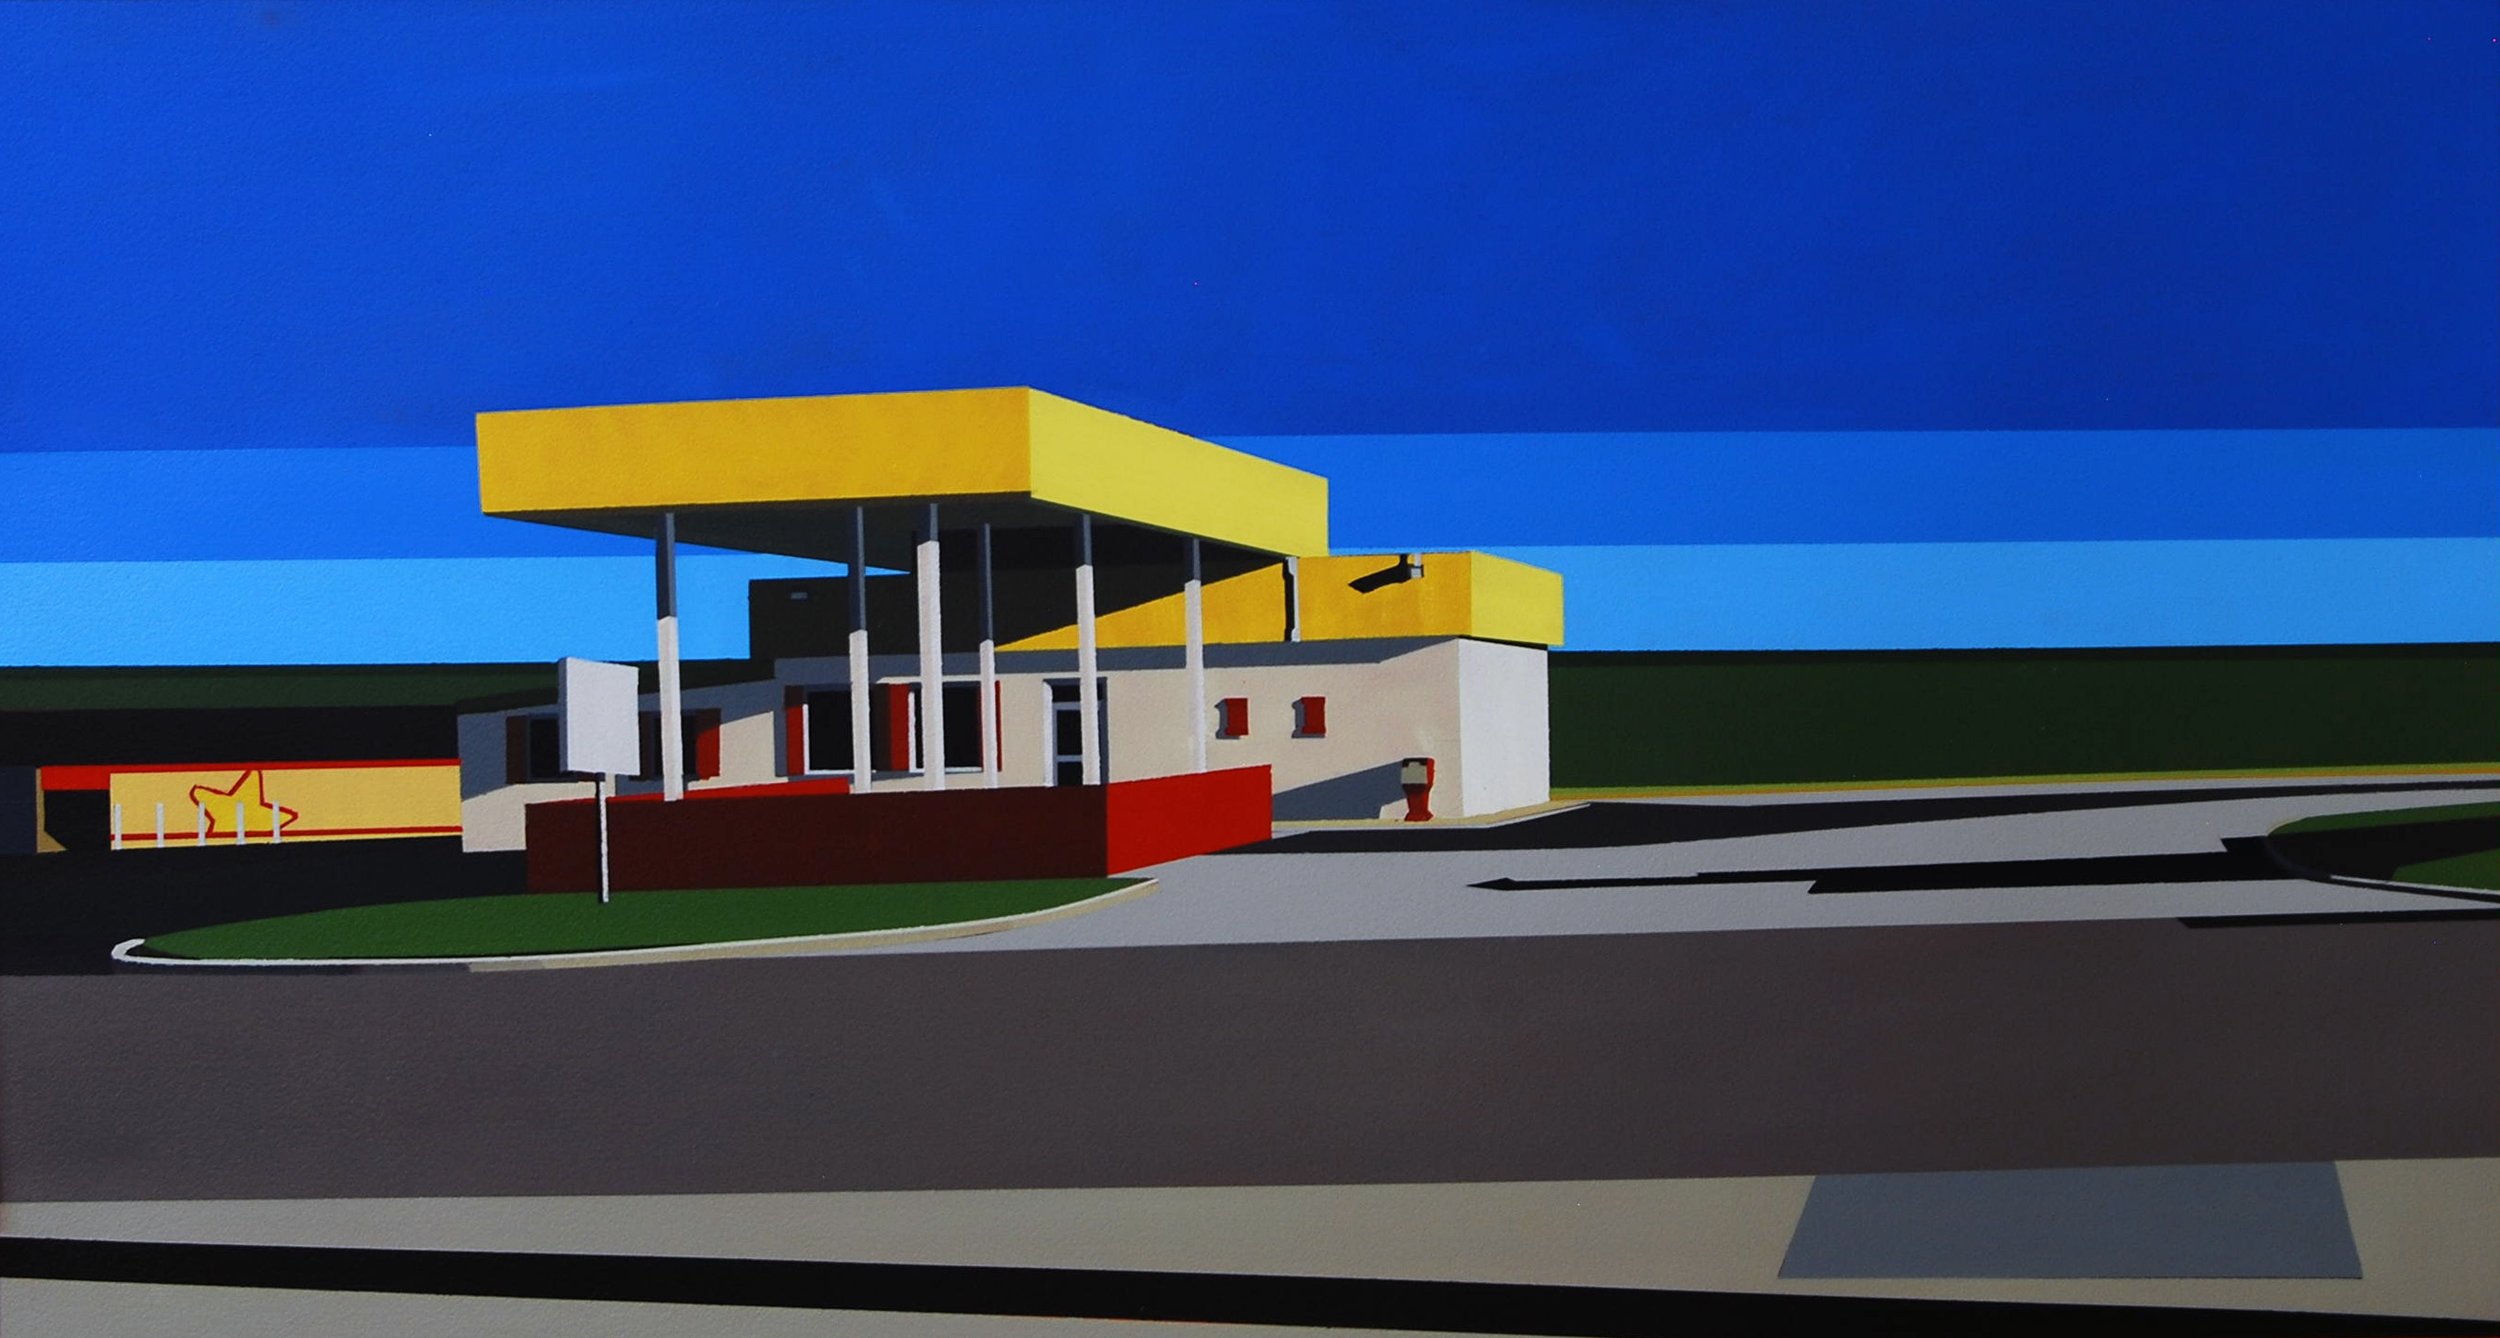 VACANCY: LEE HWY GAS STATION oil on paper | 15" x 24" | 2019